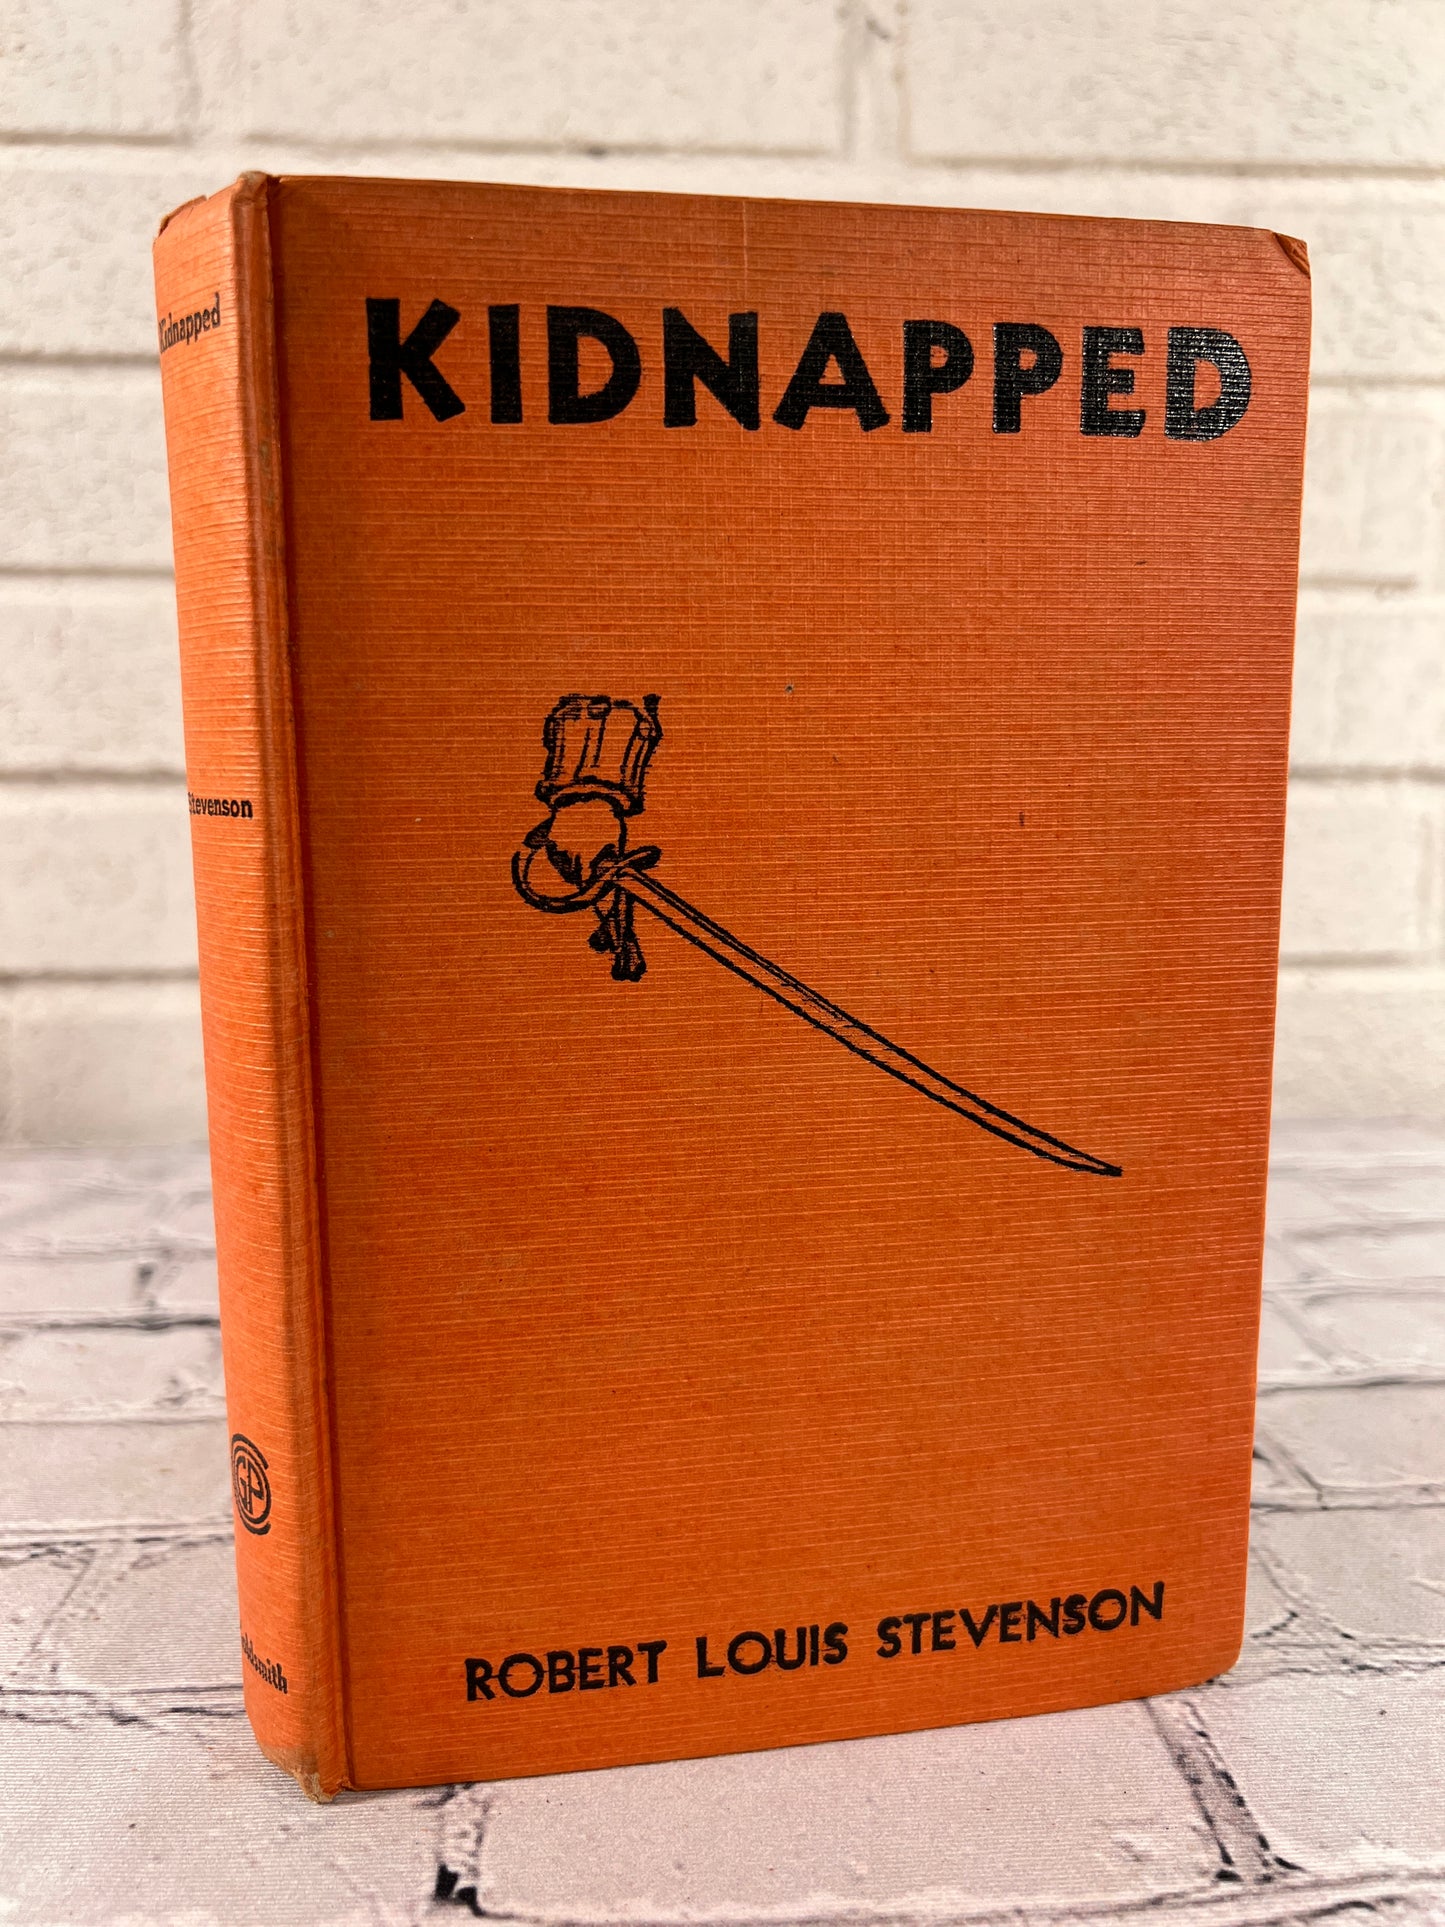 Kidnapped by Robert Louis Stevenson [No stated date]